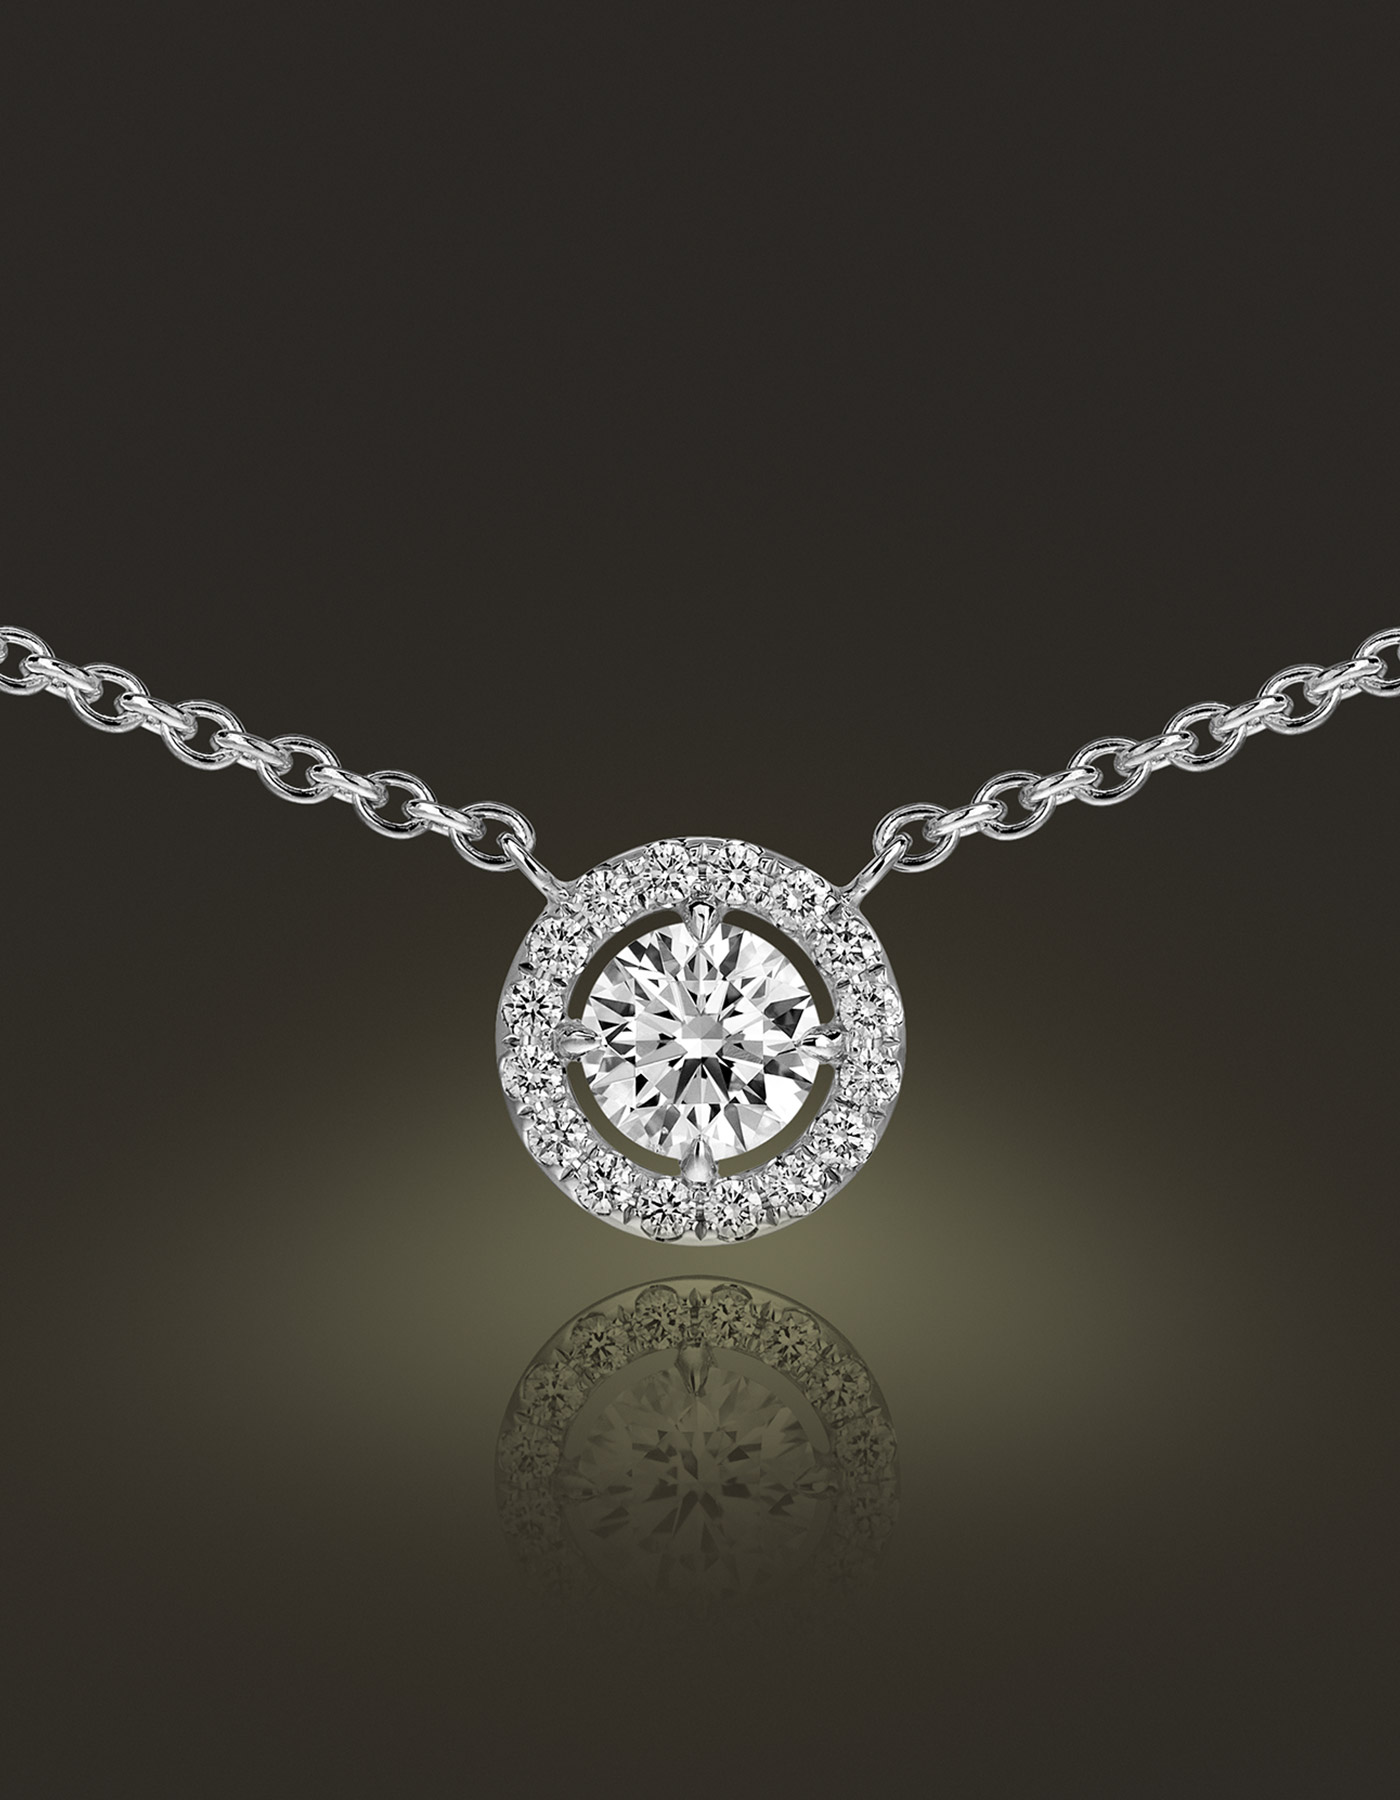 Guinnot Anonymous Halo pendant in 18k white gold